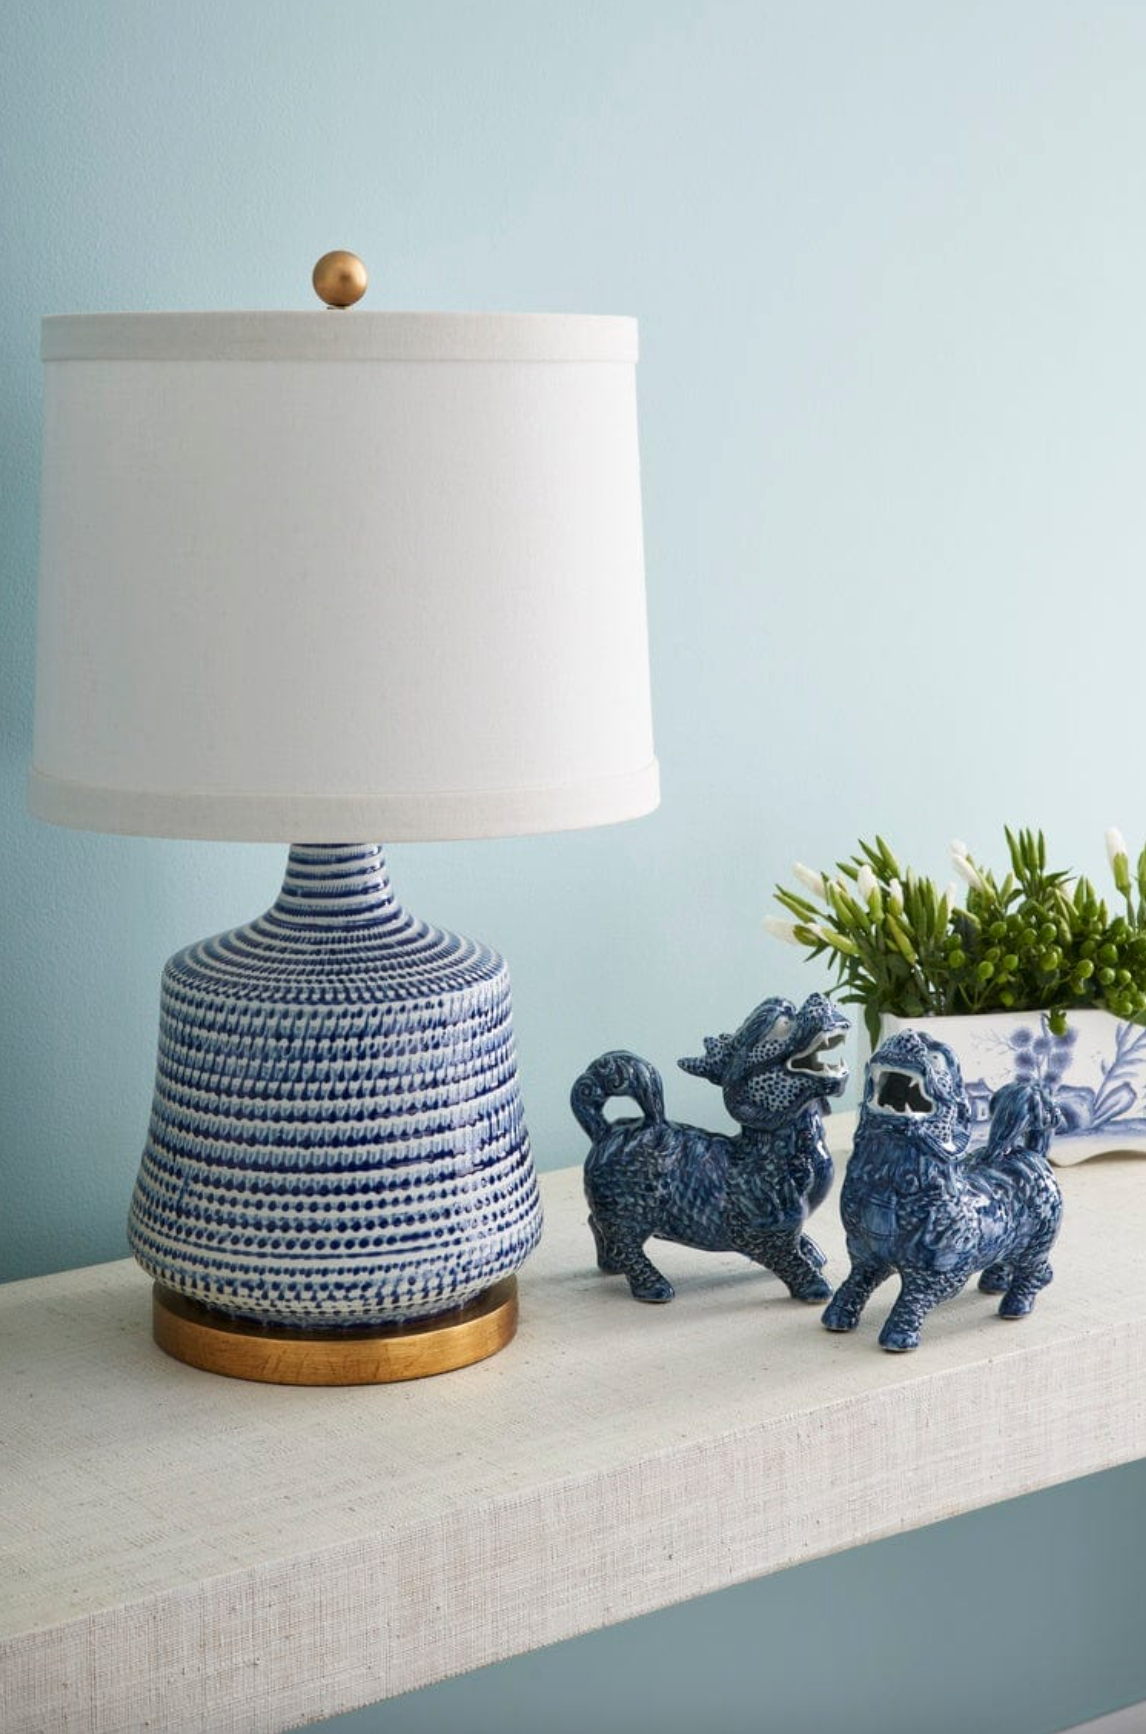 CHELSEA HOUSE Blue Foo Dogs Pair of 2